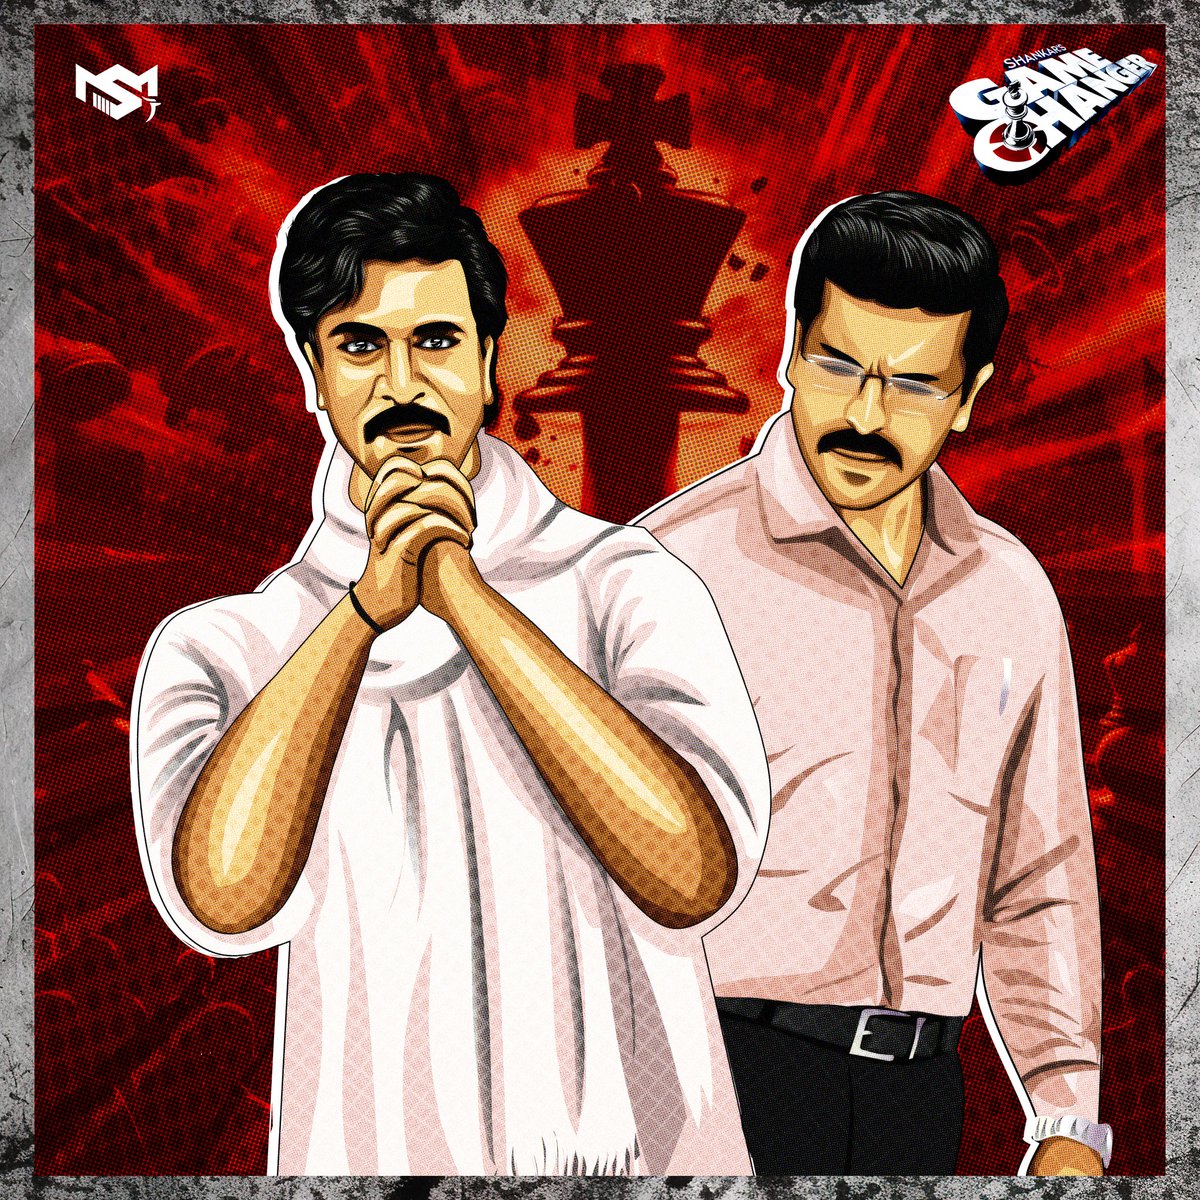 Illustration artwork of #Gamechanger #RamCharan 🔥🖌️

Just wait for this father and son duo will set the screens on 🔥🔥💪

#Apanna #Ramnandhan 🥰

#smjeditz #illustration #RC16 #RC17 

Hd link in comments section 👇